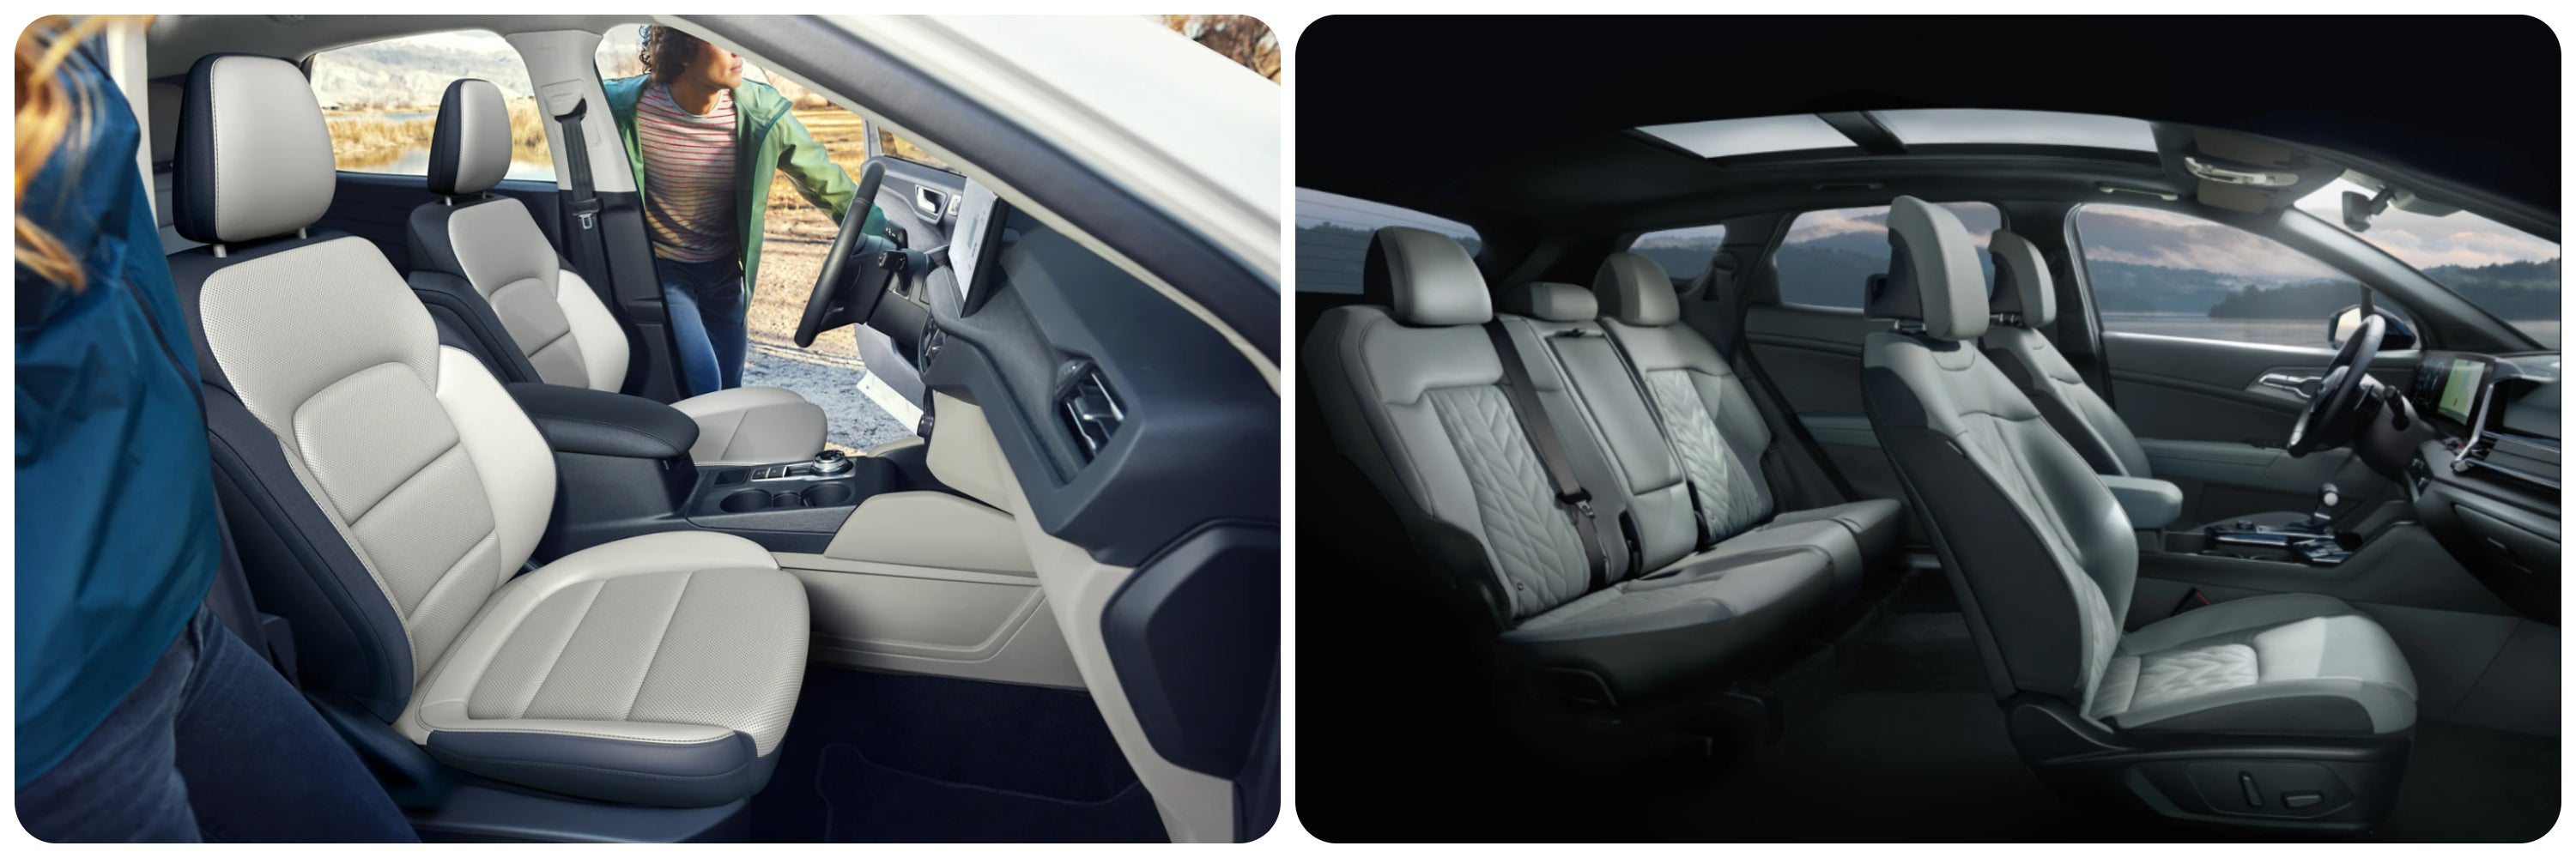 A view of the seating and cabin of the 2023 Ford Escape on the left and the 2023 Kia Sportage on the right